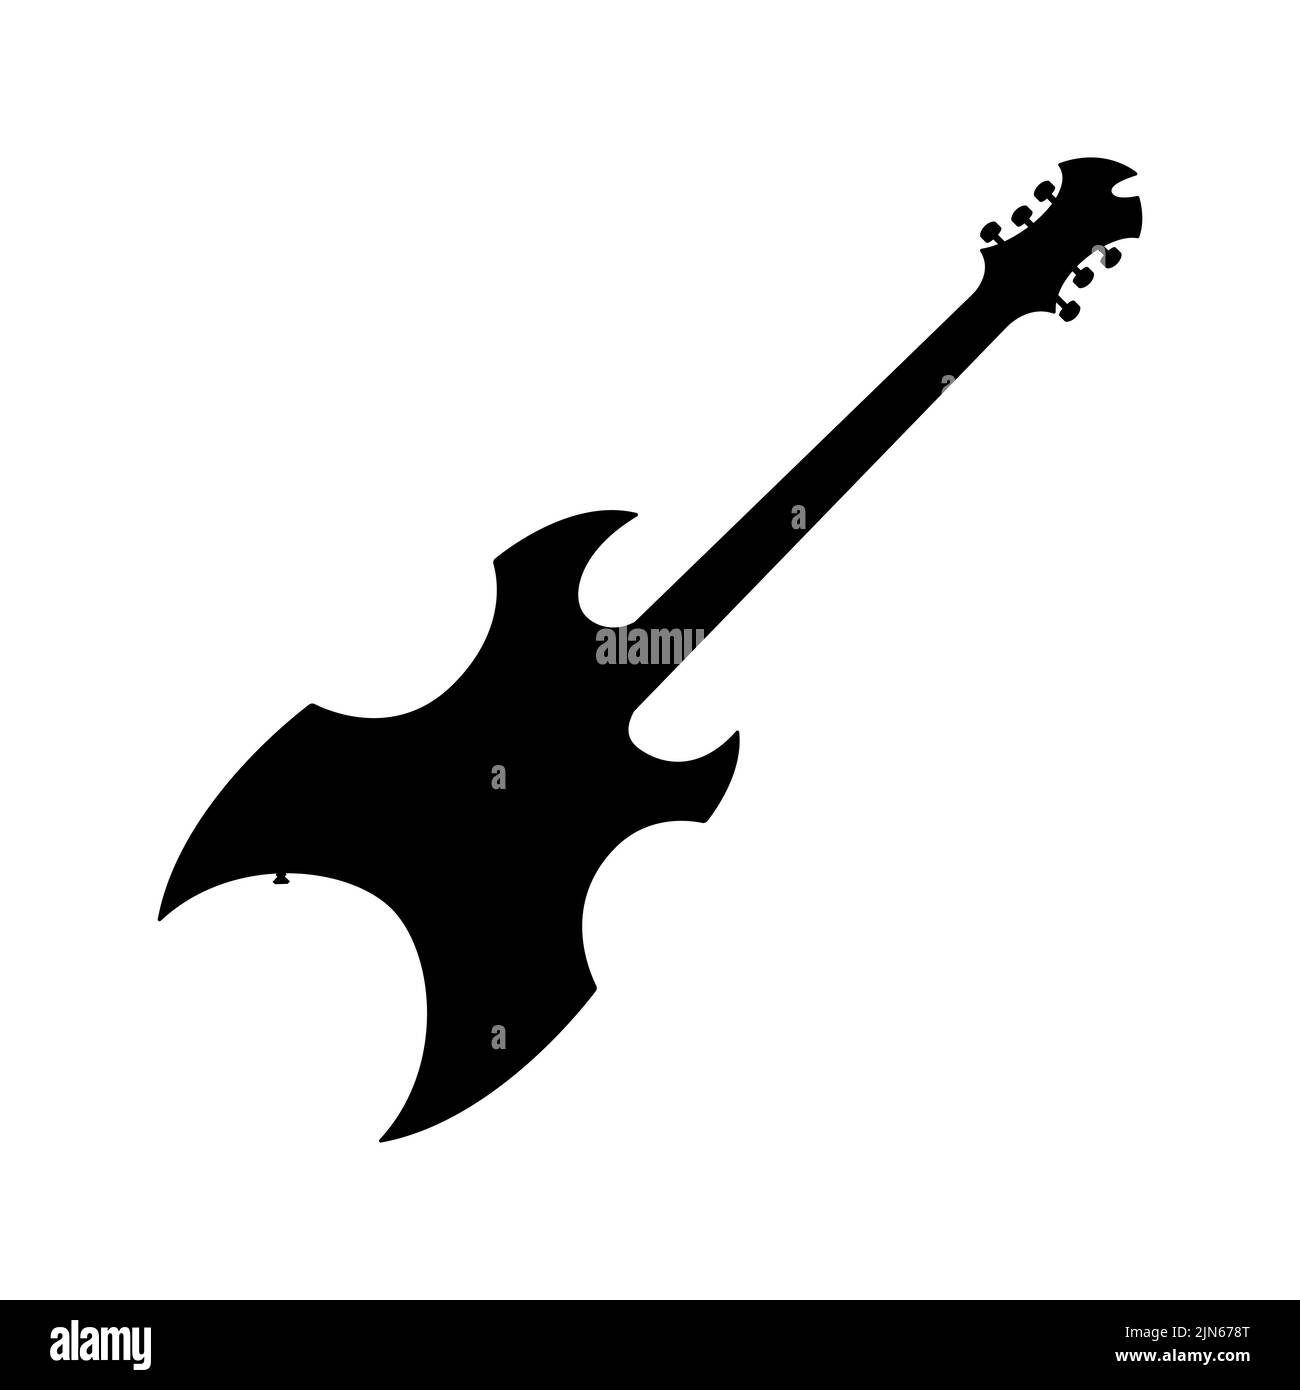 Electric bass guitar icon. Black silhouette of guitar. Music instrument icon isolated. Vector illustration. Stock Vector